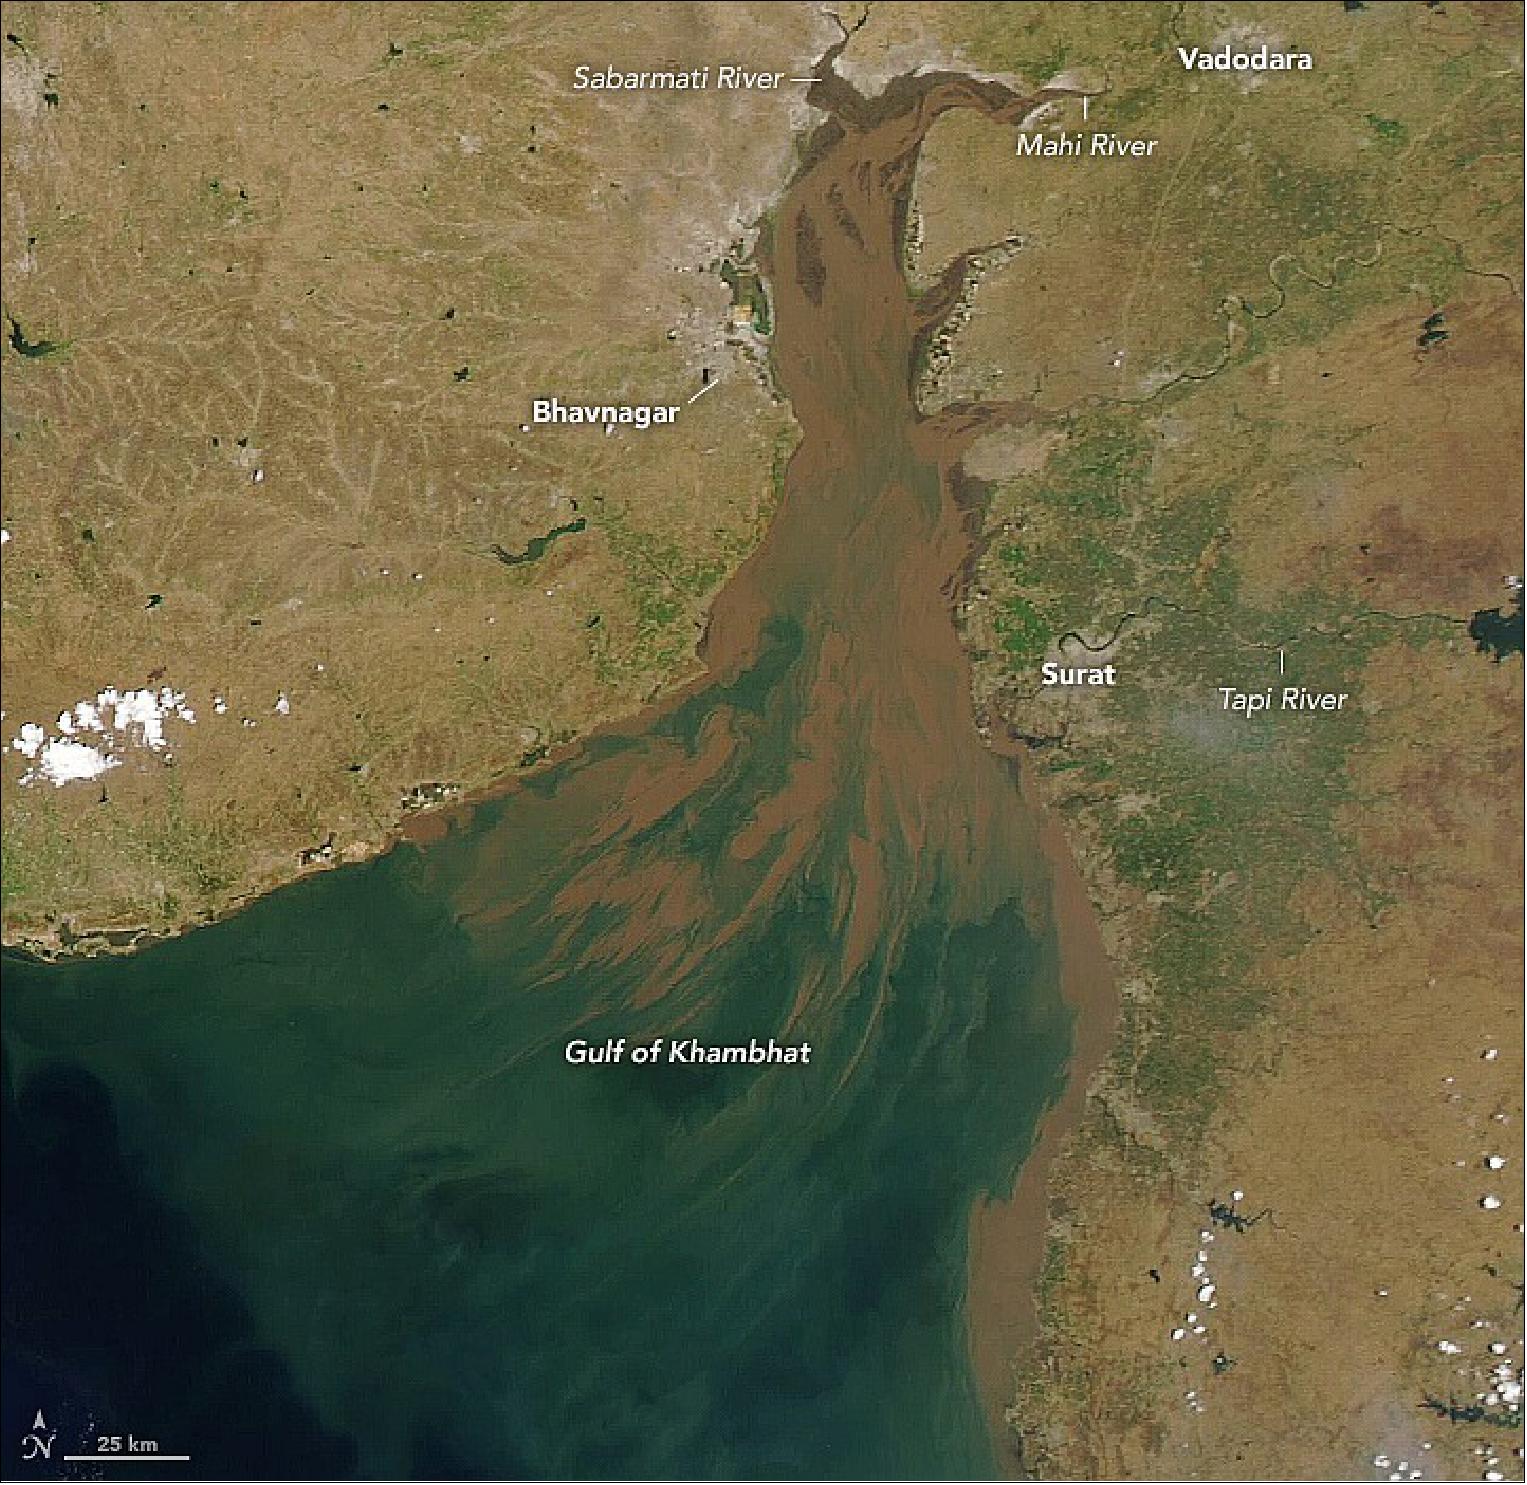 Figure 42: This image was acquired on 16 October 2021. The Gujarat coast experiences the highest tides anywhere along the Indian coastline, and the funnel shape of the 145-km (90-mile) long Gulf of Khambhat amplifies them. As incoming tides are constricted by the narrowing gulf, they increase in height. At Bhavnagar, the maximum neap tide height is 10 meters (33 feet) while the maximum spring tide height is 11.6 meters (38 feet)—some of the largest tidal ranges in the world (image credit: NASA Earth Observatory images by Lauren Dauphin, using MODIS data from NASA EOSDIS LANCE and GIBS/Worldview. Story by Sara E. Pratt)